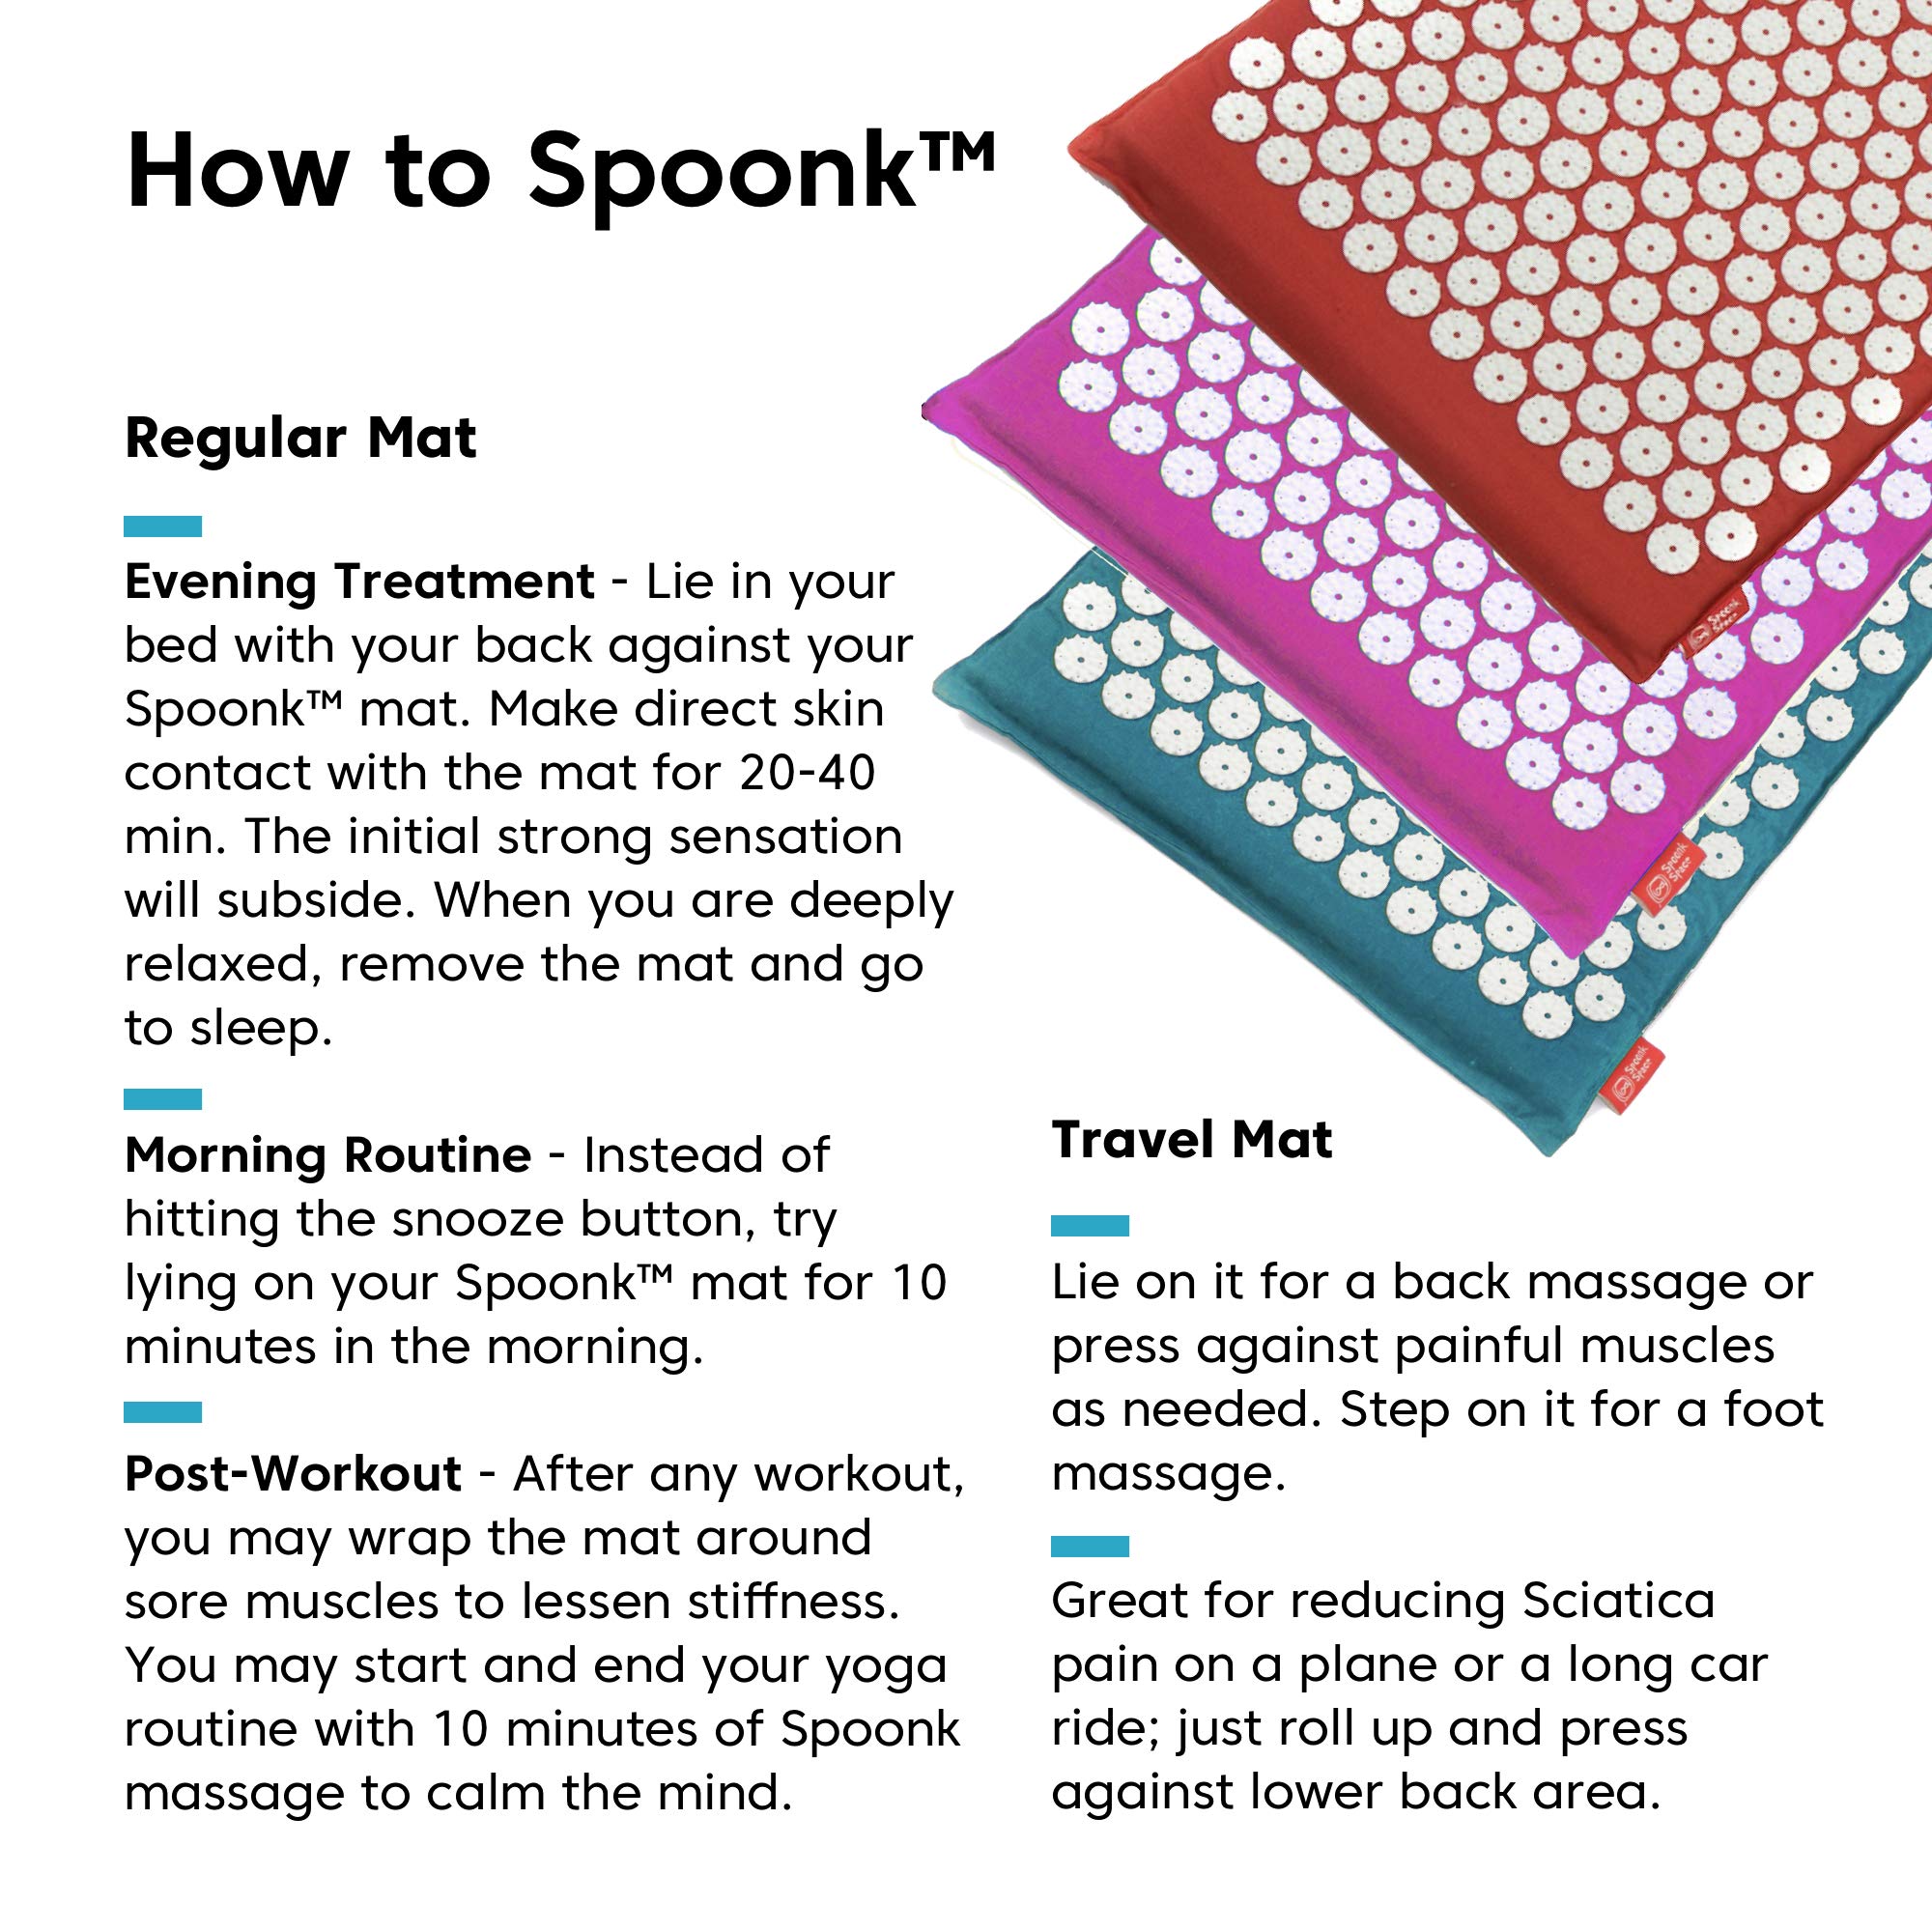 Spoonk Acupressure Eco Mat, Cherry Red - Combo Regular & Travel Mat - Back & Neck Massager - Great Travel Pillow - Stress & Muscle Relief - Sleep Aid - Relaxation Kit - Made with Organic Hemp…